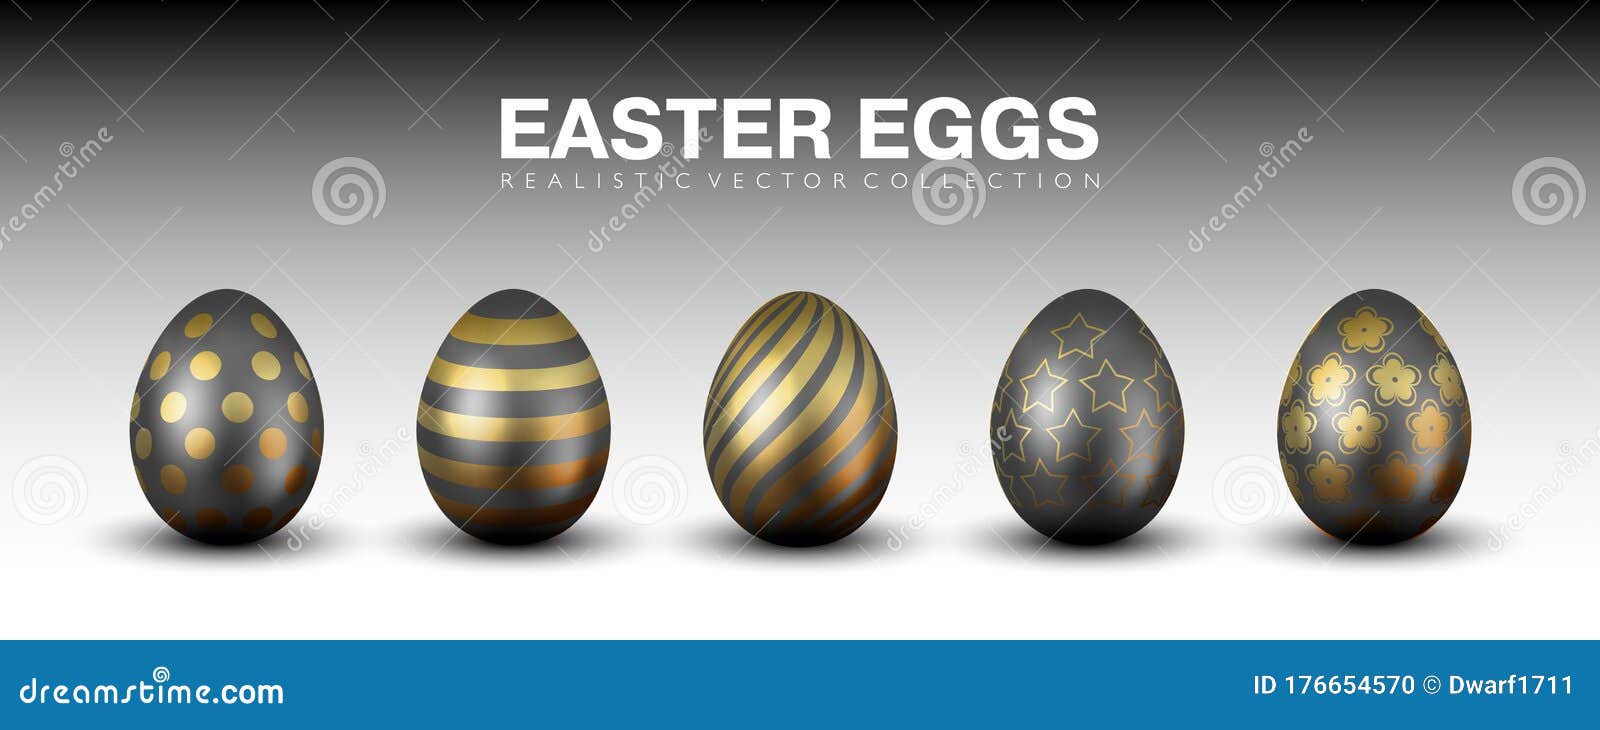 Luxury stylish matte black realistic 3D easter eggs vector collection with different golden ornaments 